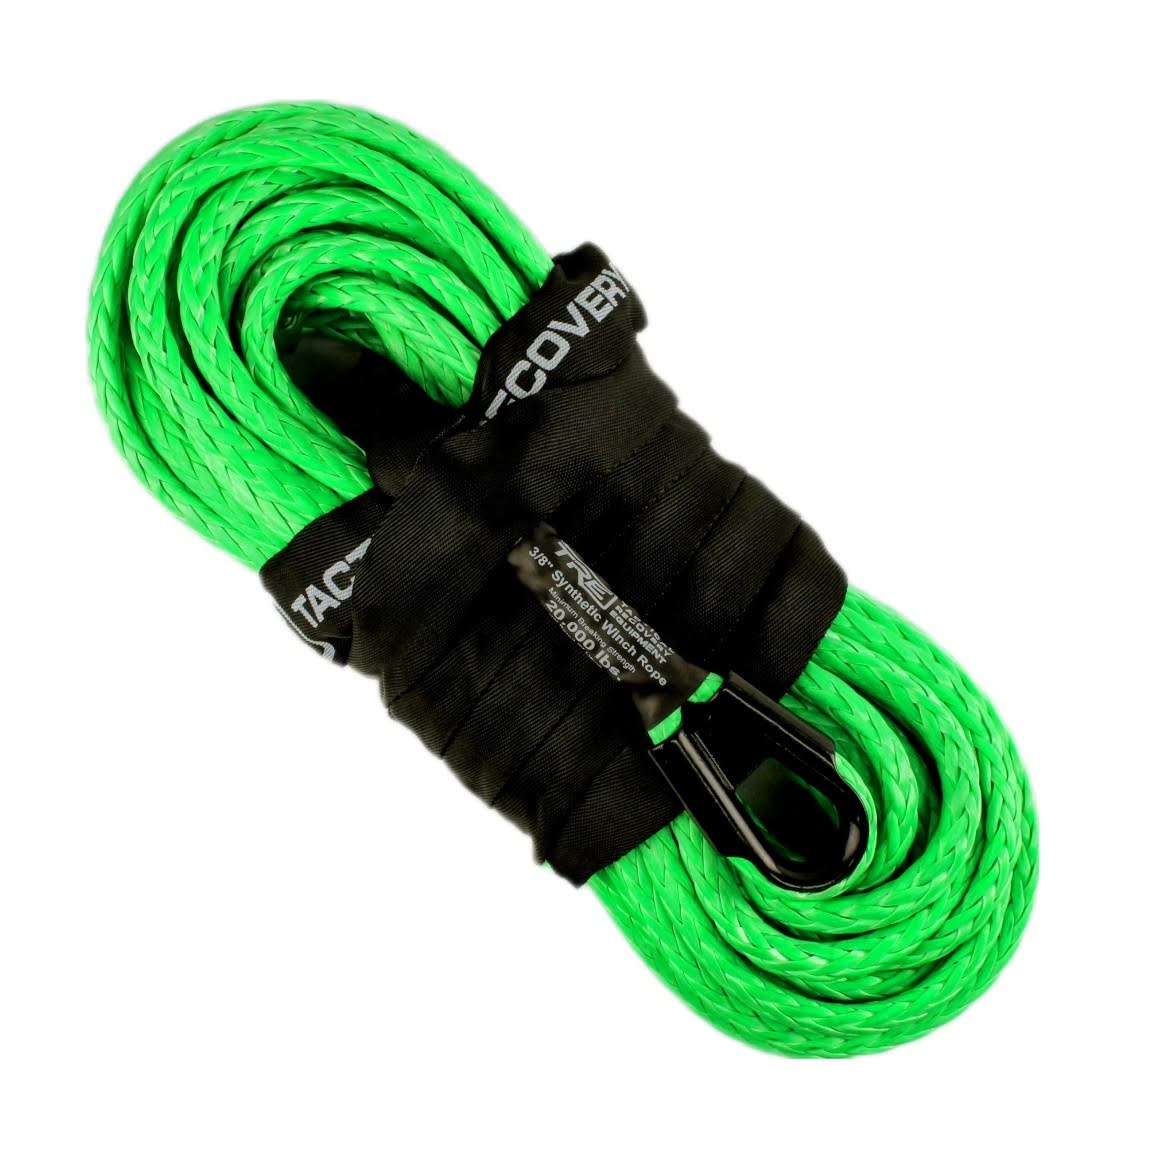 3/8 Winch Rope Extensions - 20,000 lb. Breaking Strength